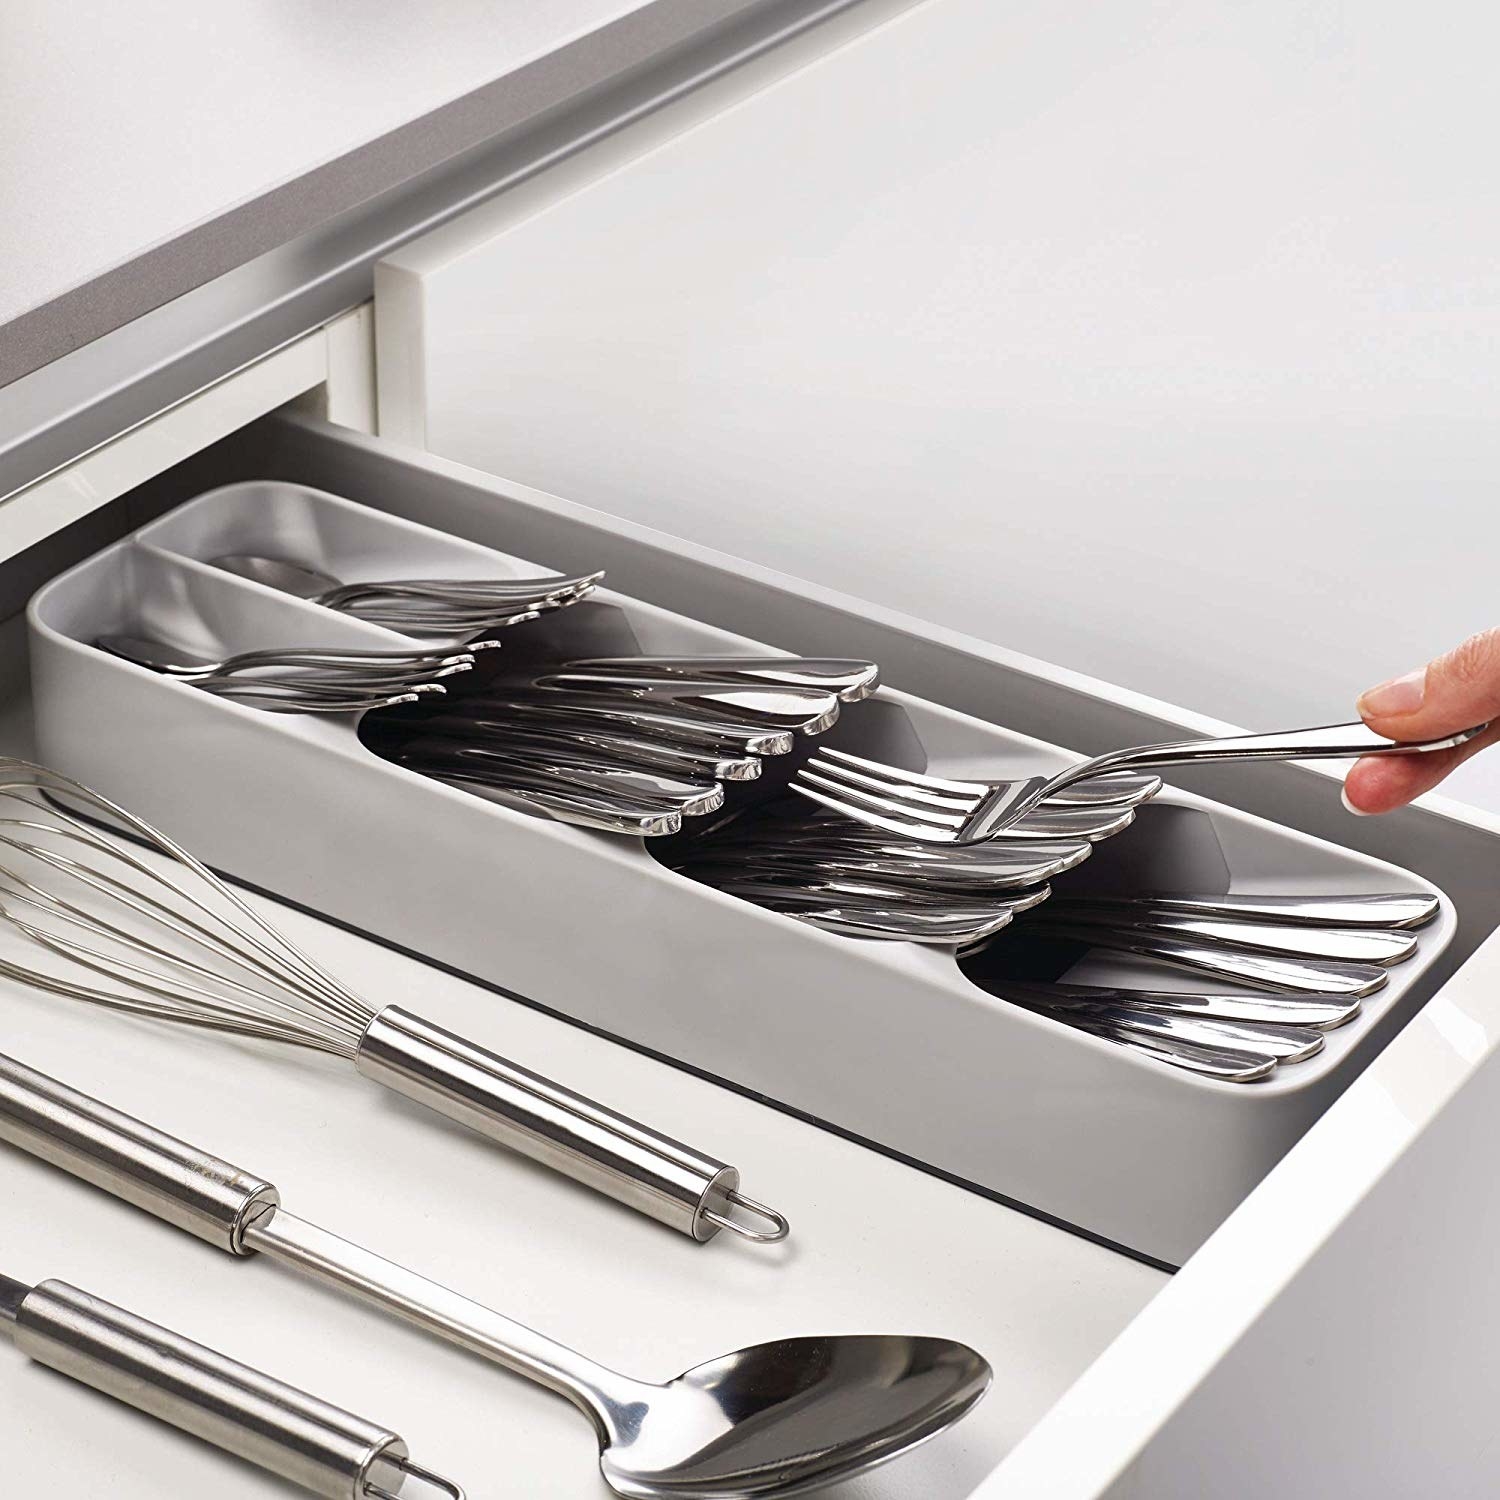 Silverware in the grey four-compartment organizer, taking up just part of a drawer